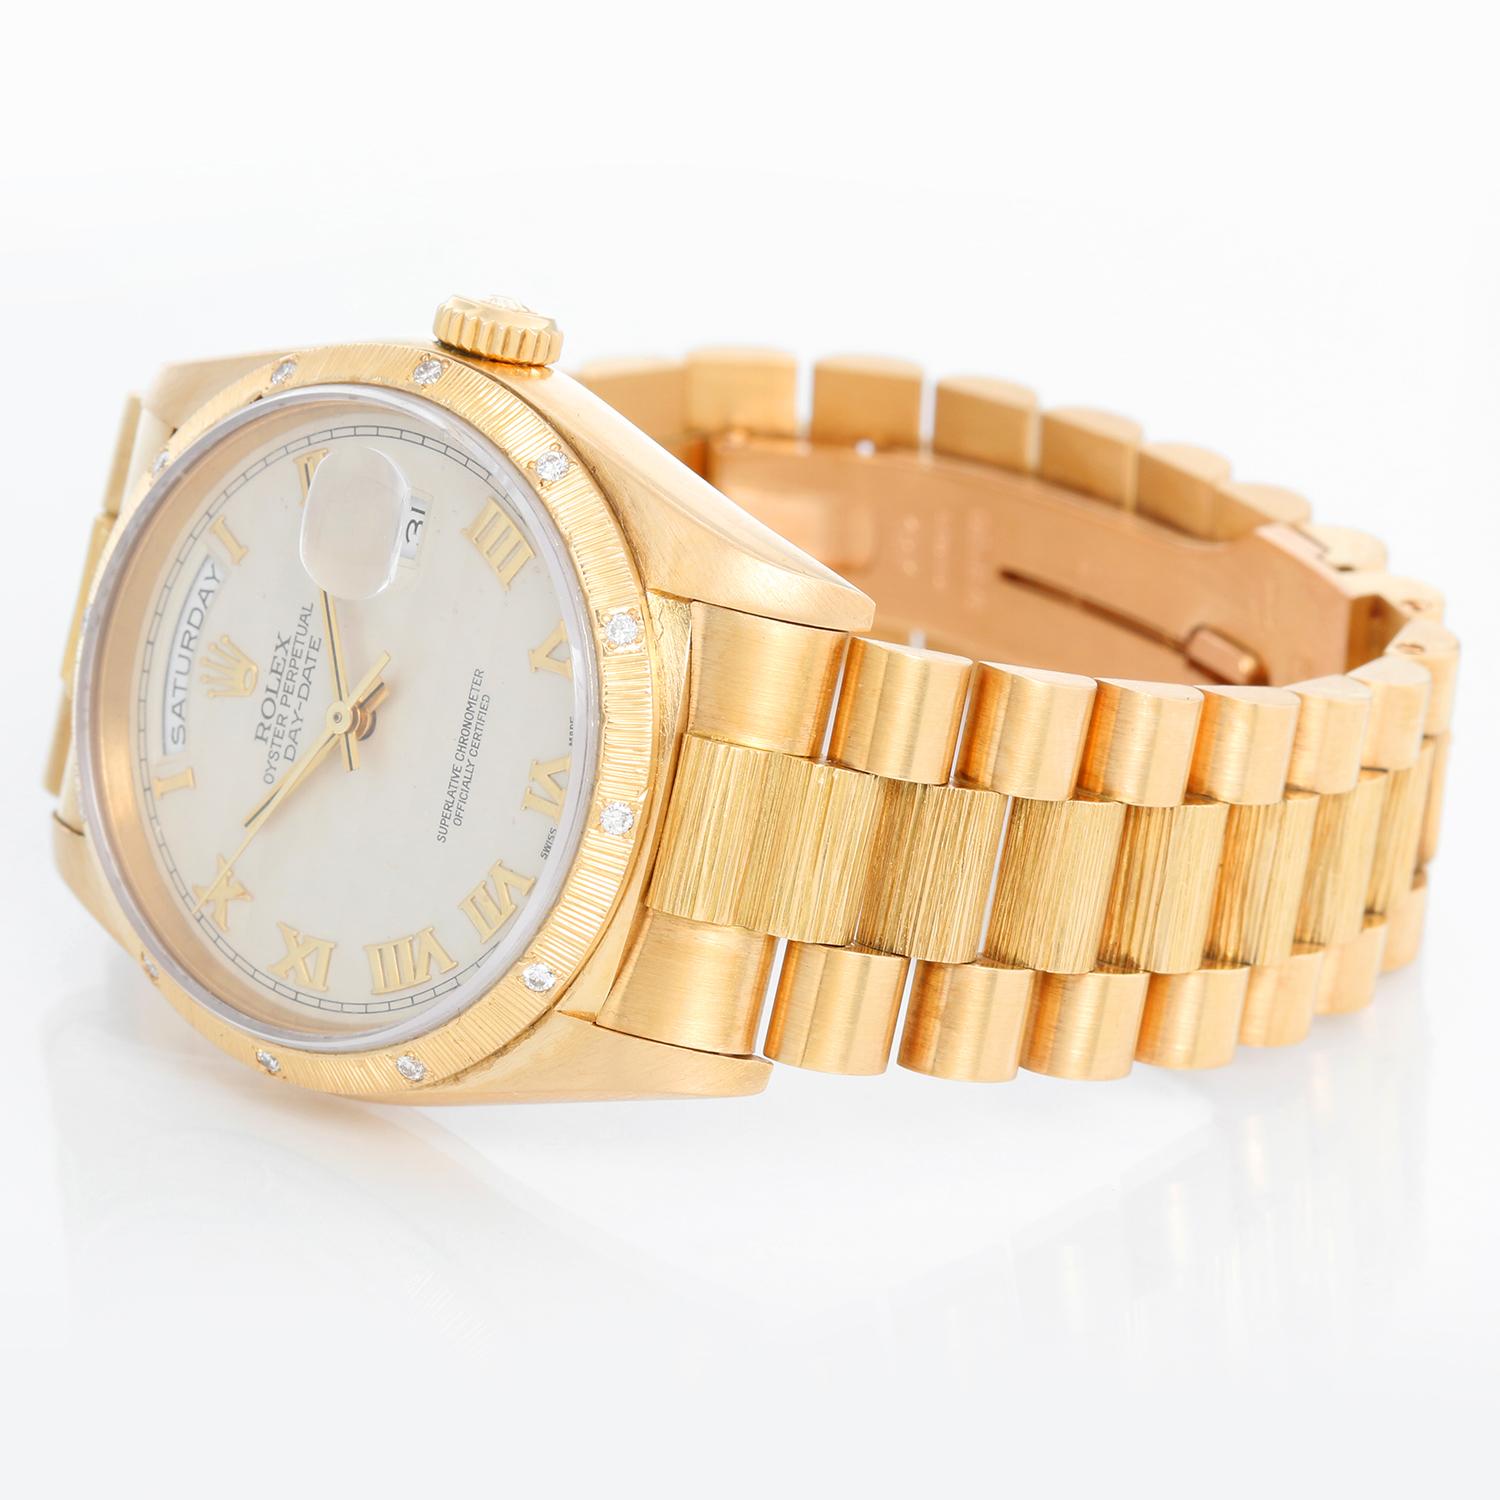 Rolex Bark President Day-Date Men's 18k Gold Watch 18248 - Automatic winding; Double quick-set; sapphire crystal. 18k yellow gold case with original barked bezel with diamonds added later (36 mm ) Can switch to plain bezel if desired. Cream Roman